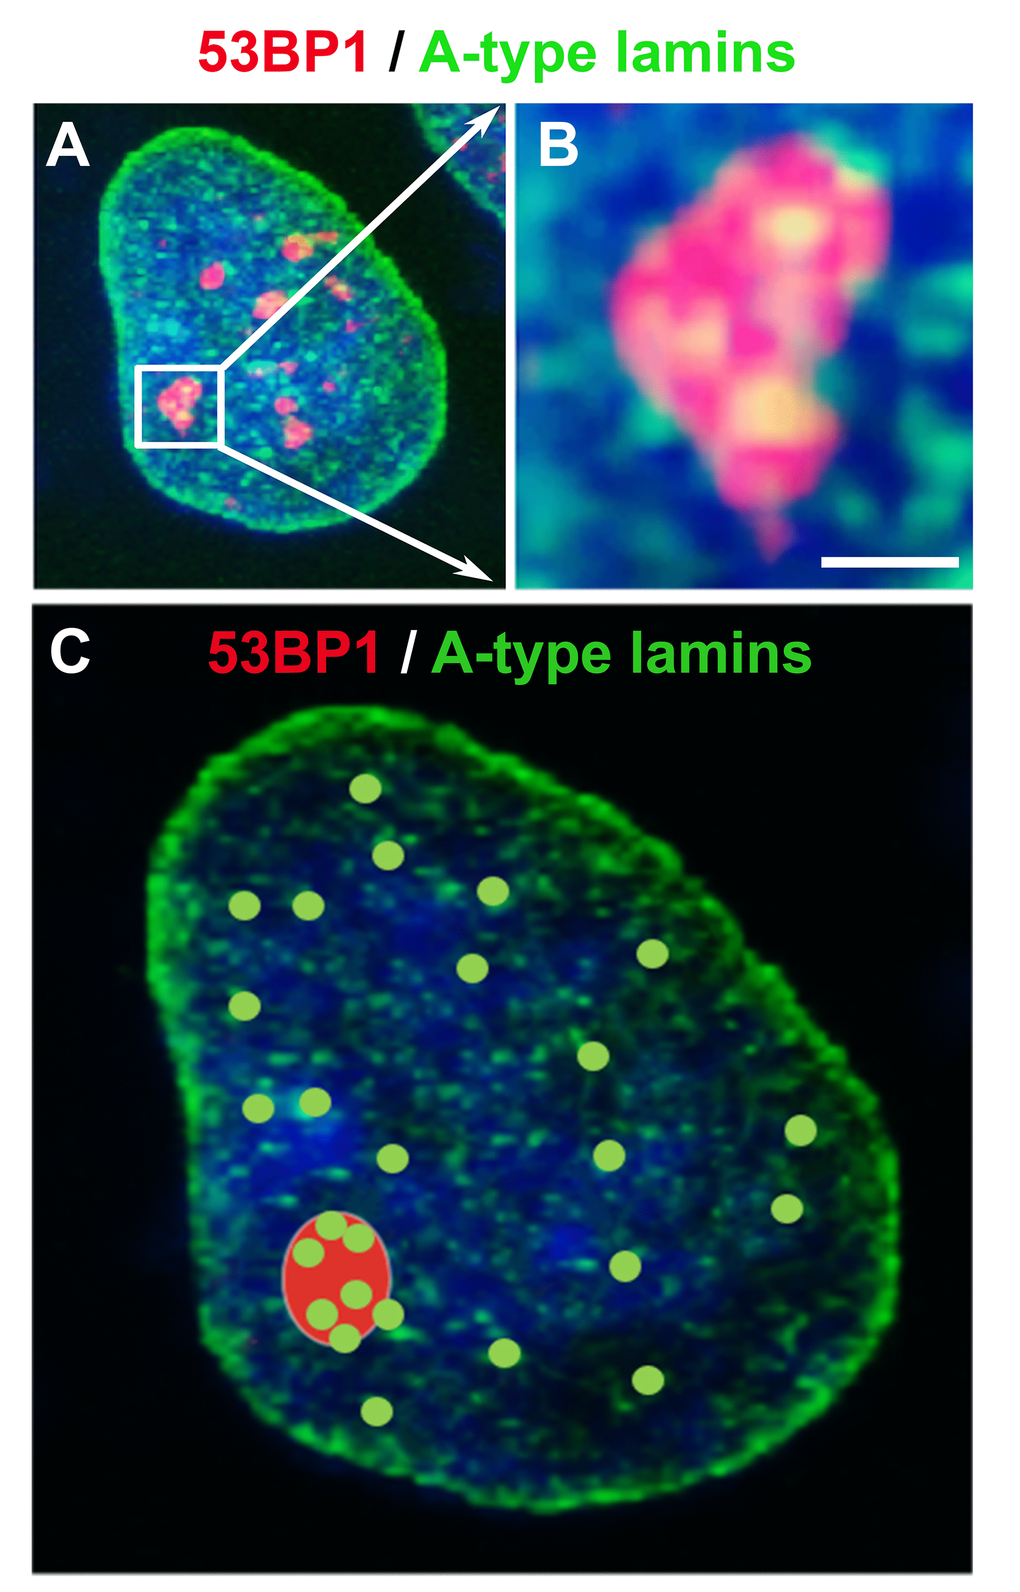 The nuclear distribution pattern of A-type lamins (green) in 53BP1-positive DNA repair foci (red). (A) Spontaneously occurring DNA lesions in HeLa cells are shown, and (B) magnification is delineated by white arrows. Although A-type lamins do not directly accumulate at DNA lesions, (C) lamin A/C positivity in spontaneous DNA lesions could be essential for the stability of these 53BP1-positive foci and their error-free repair (refer to primary data and methodology in [155,156]). Scale bars, 0.5 µm.